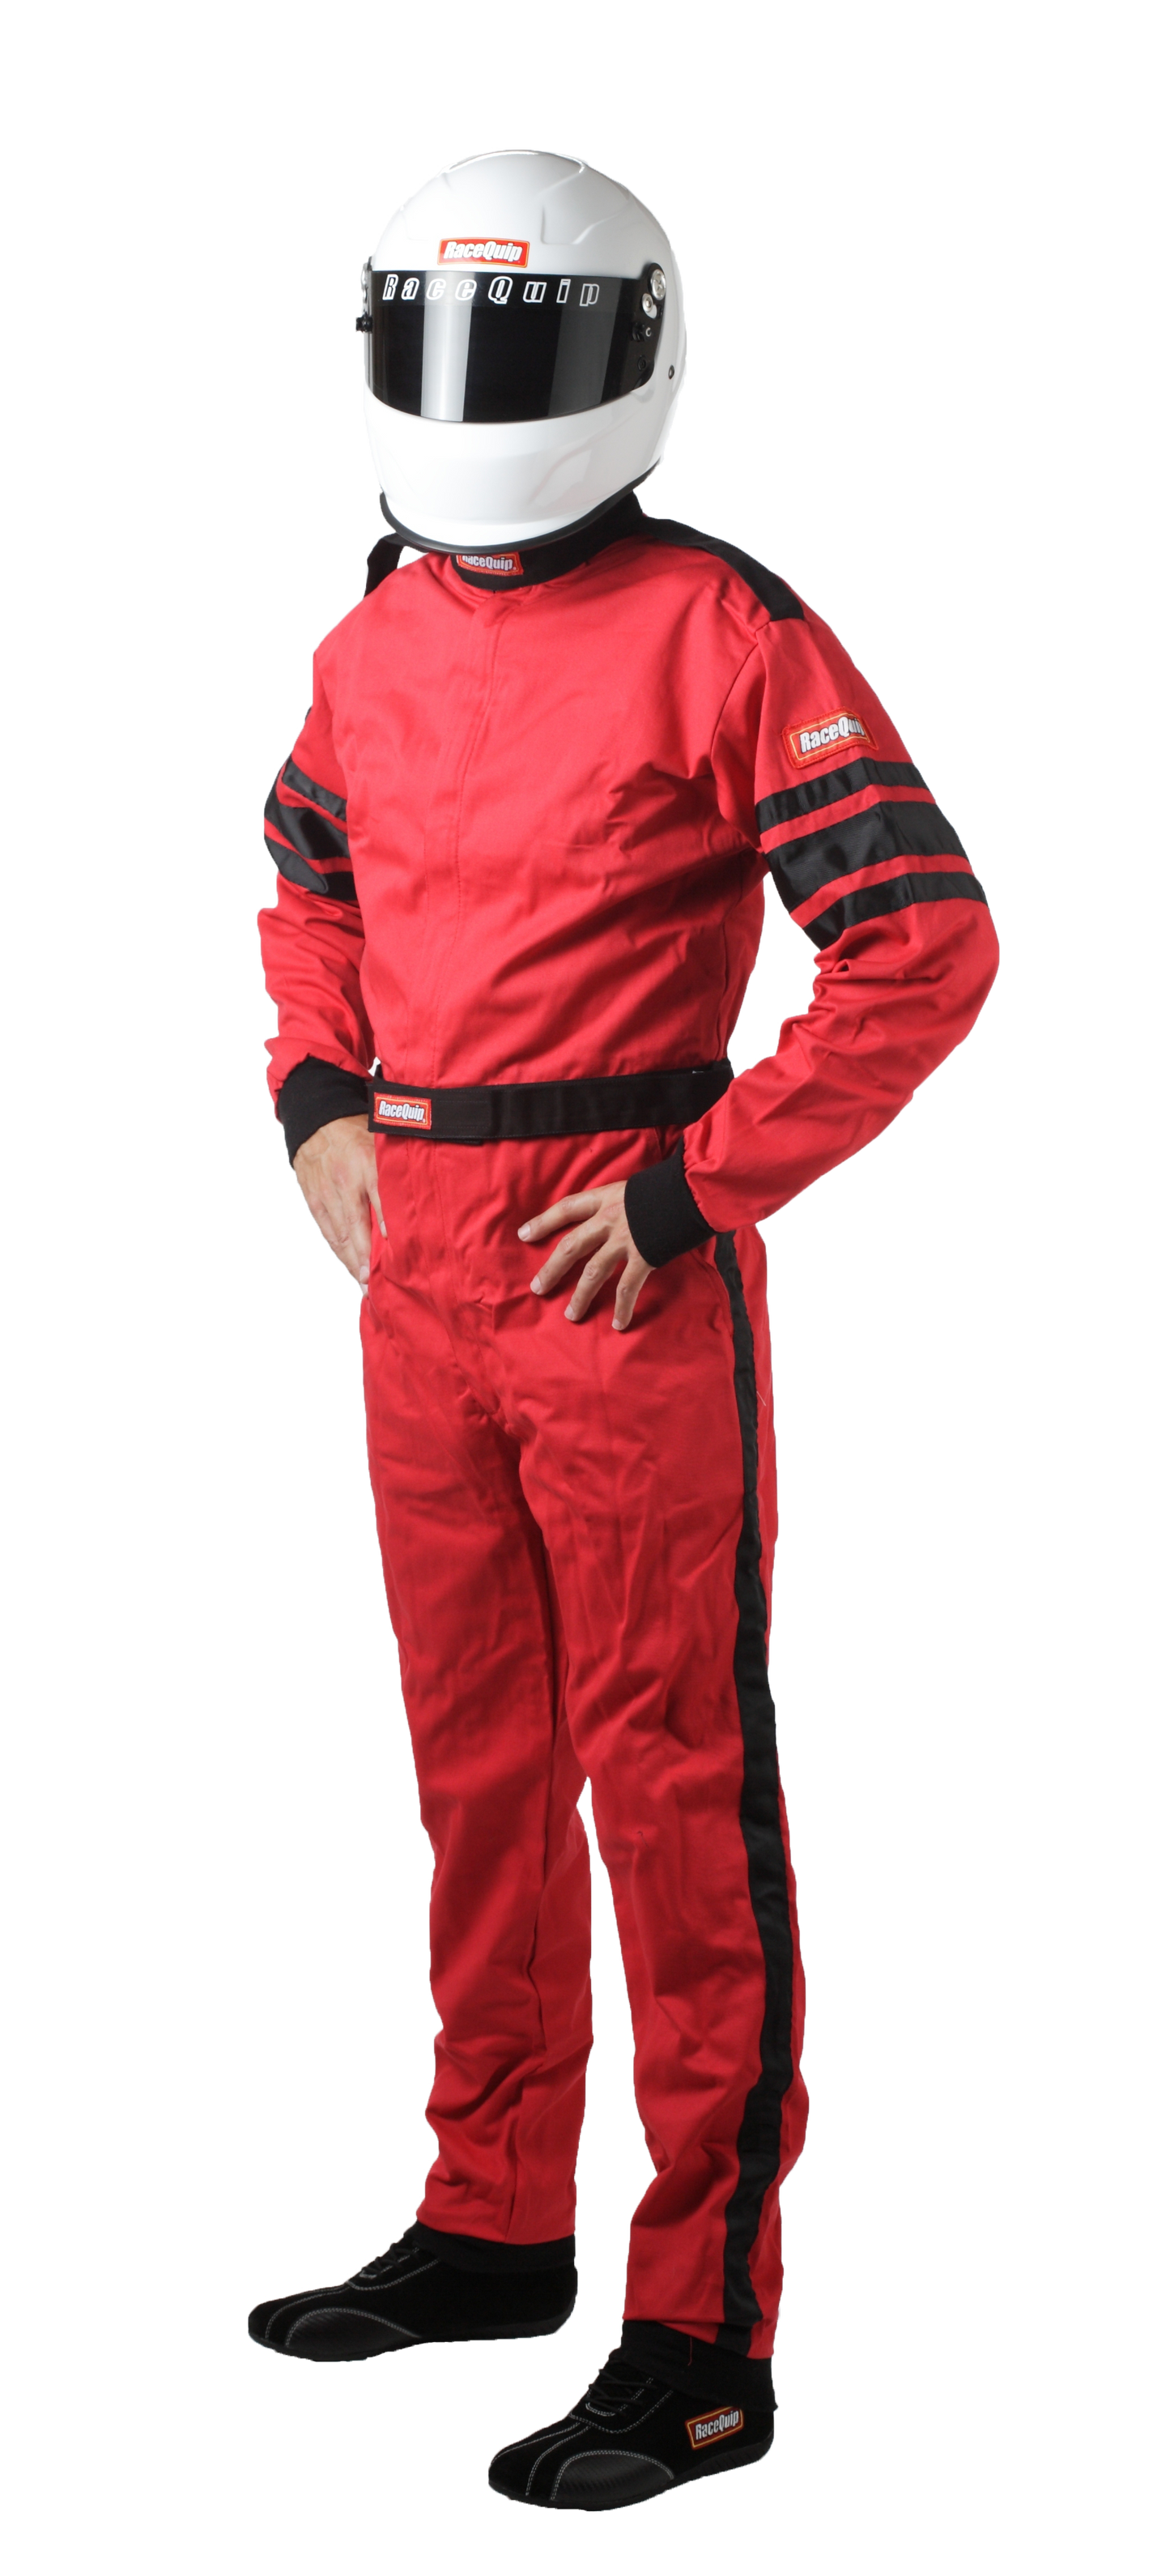 RaceQuip - One Piece Single Layer Racing Driver Fire Suit SFI 3.2A/ 1